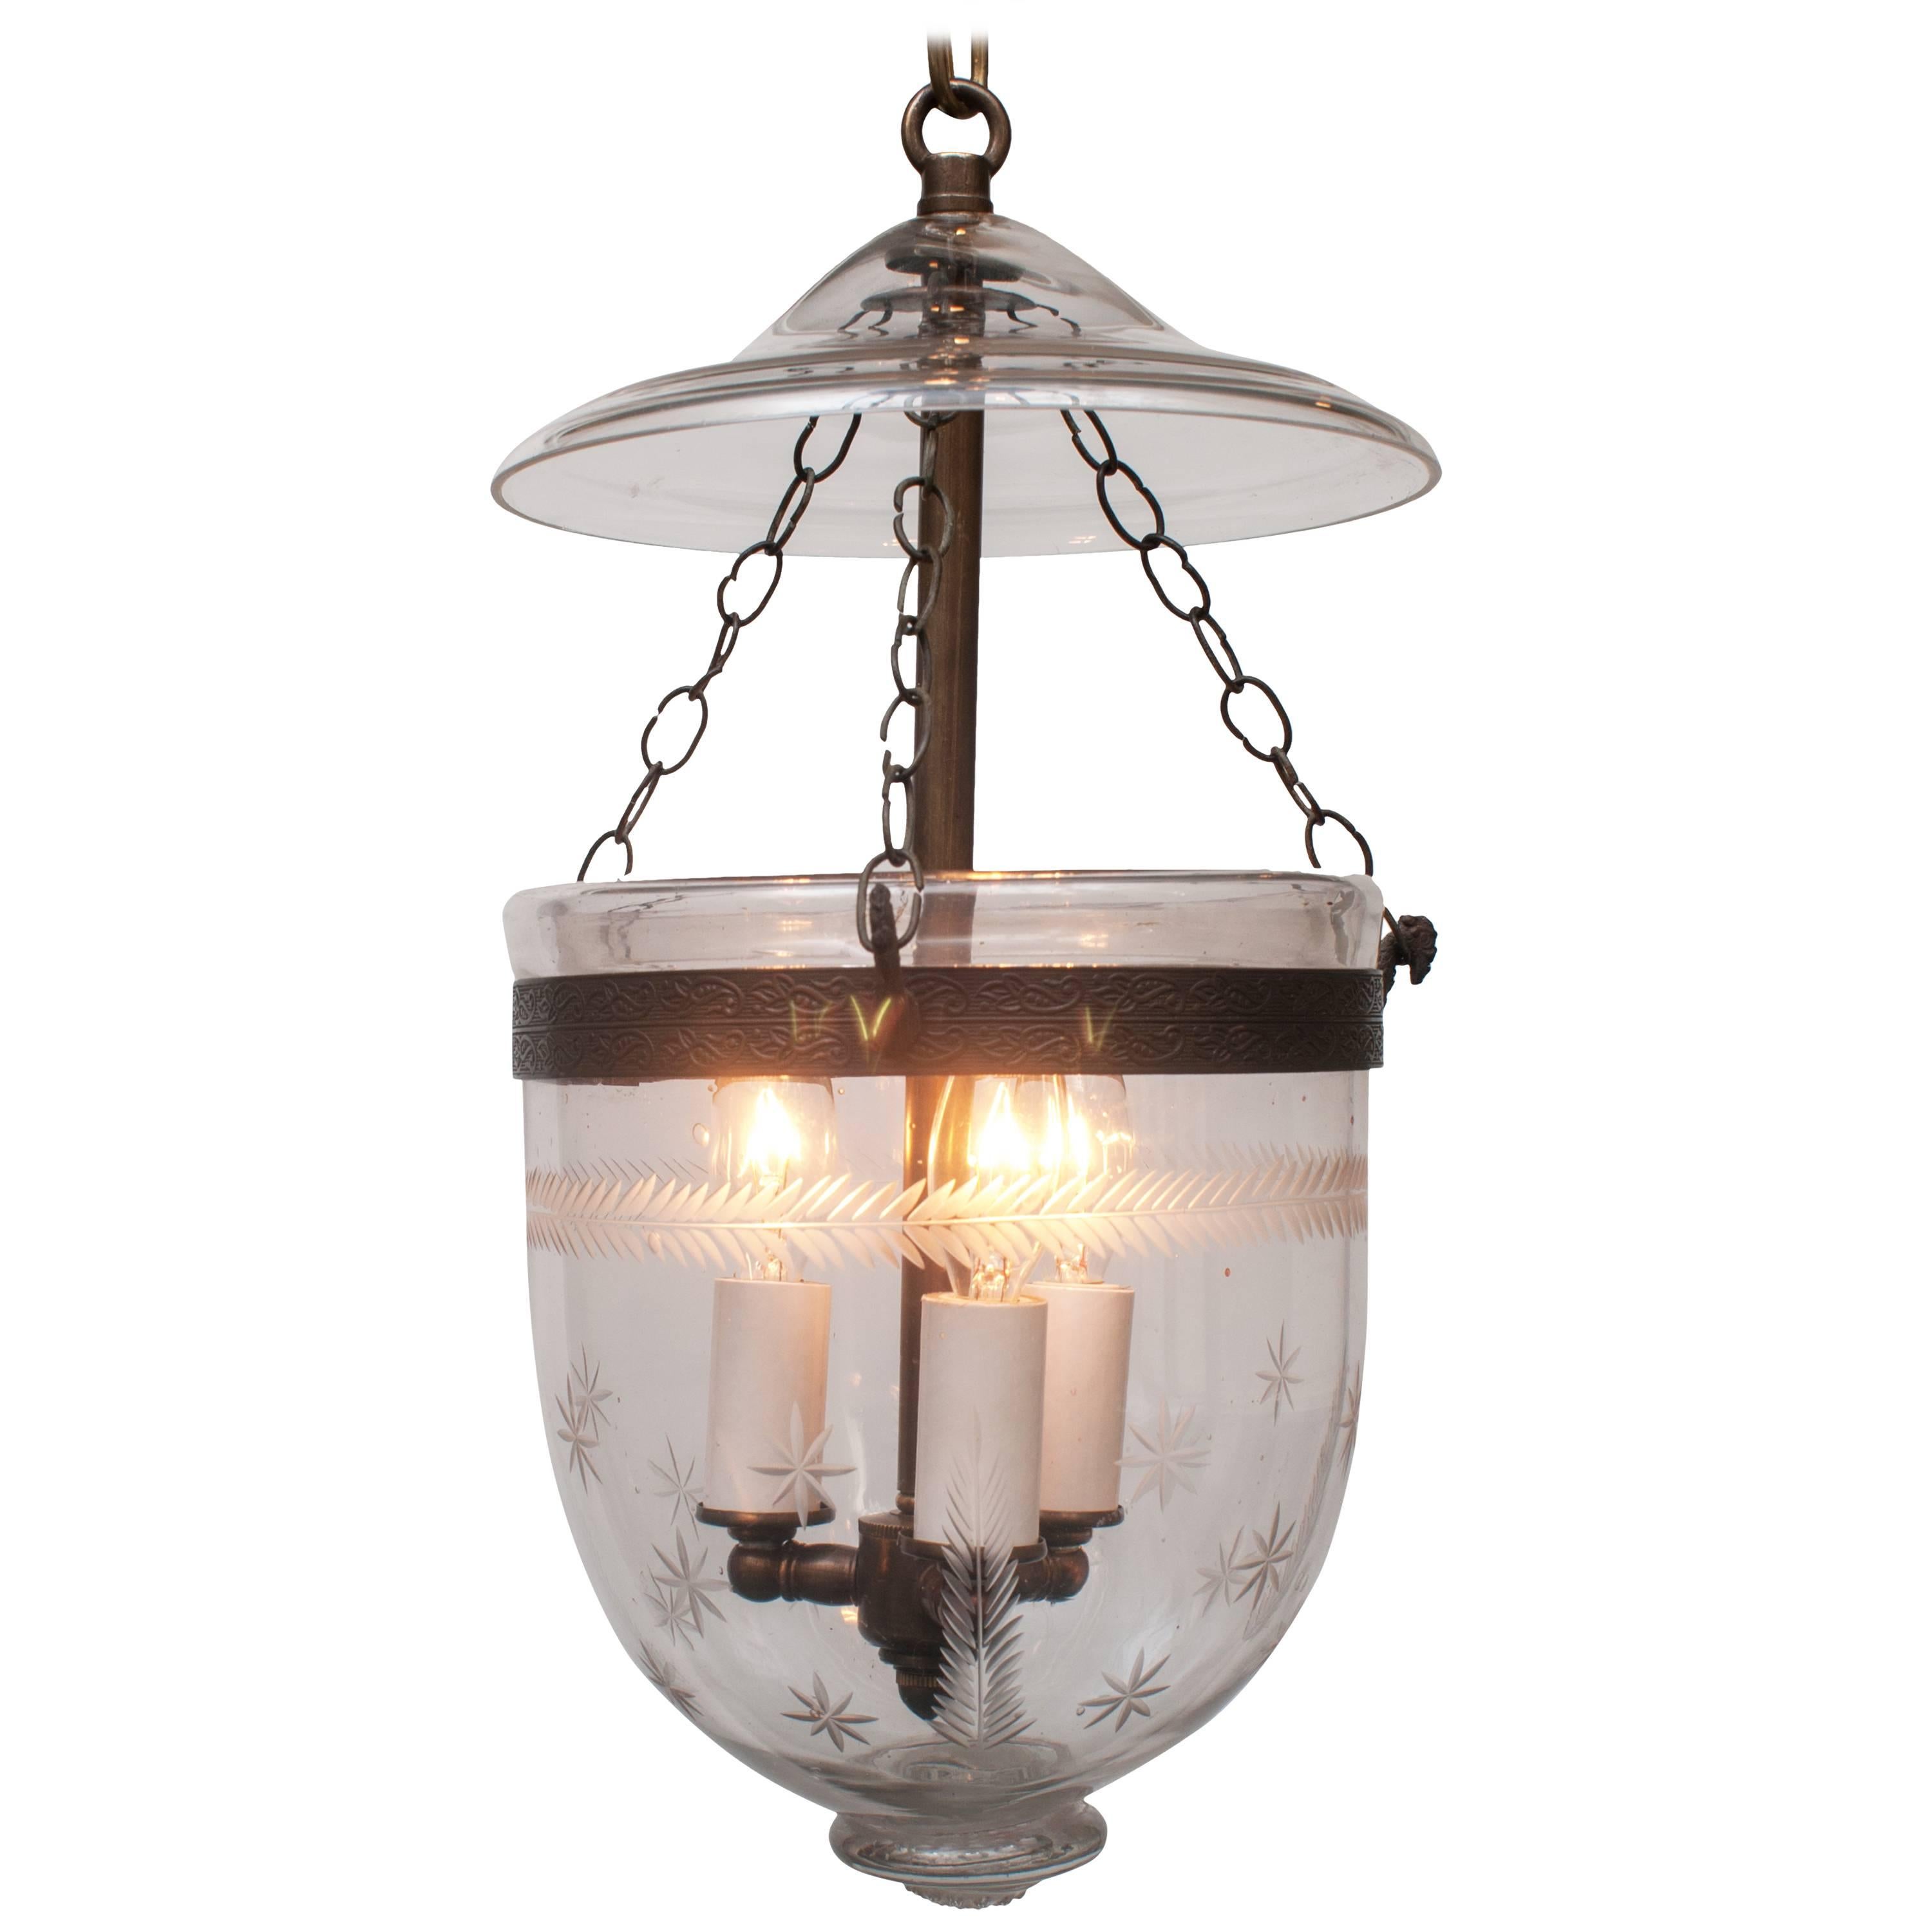 Petite Bell Jar Lantern, Etched Star and Fern Pattern